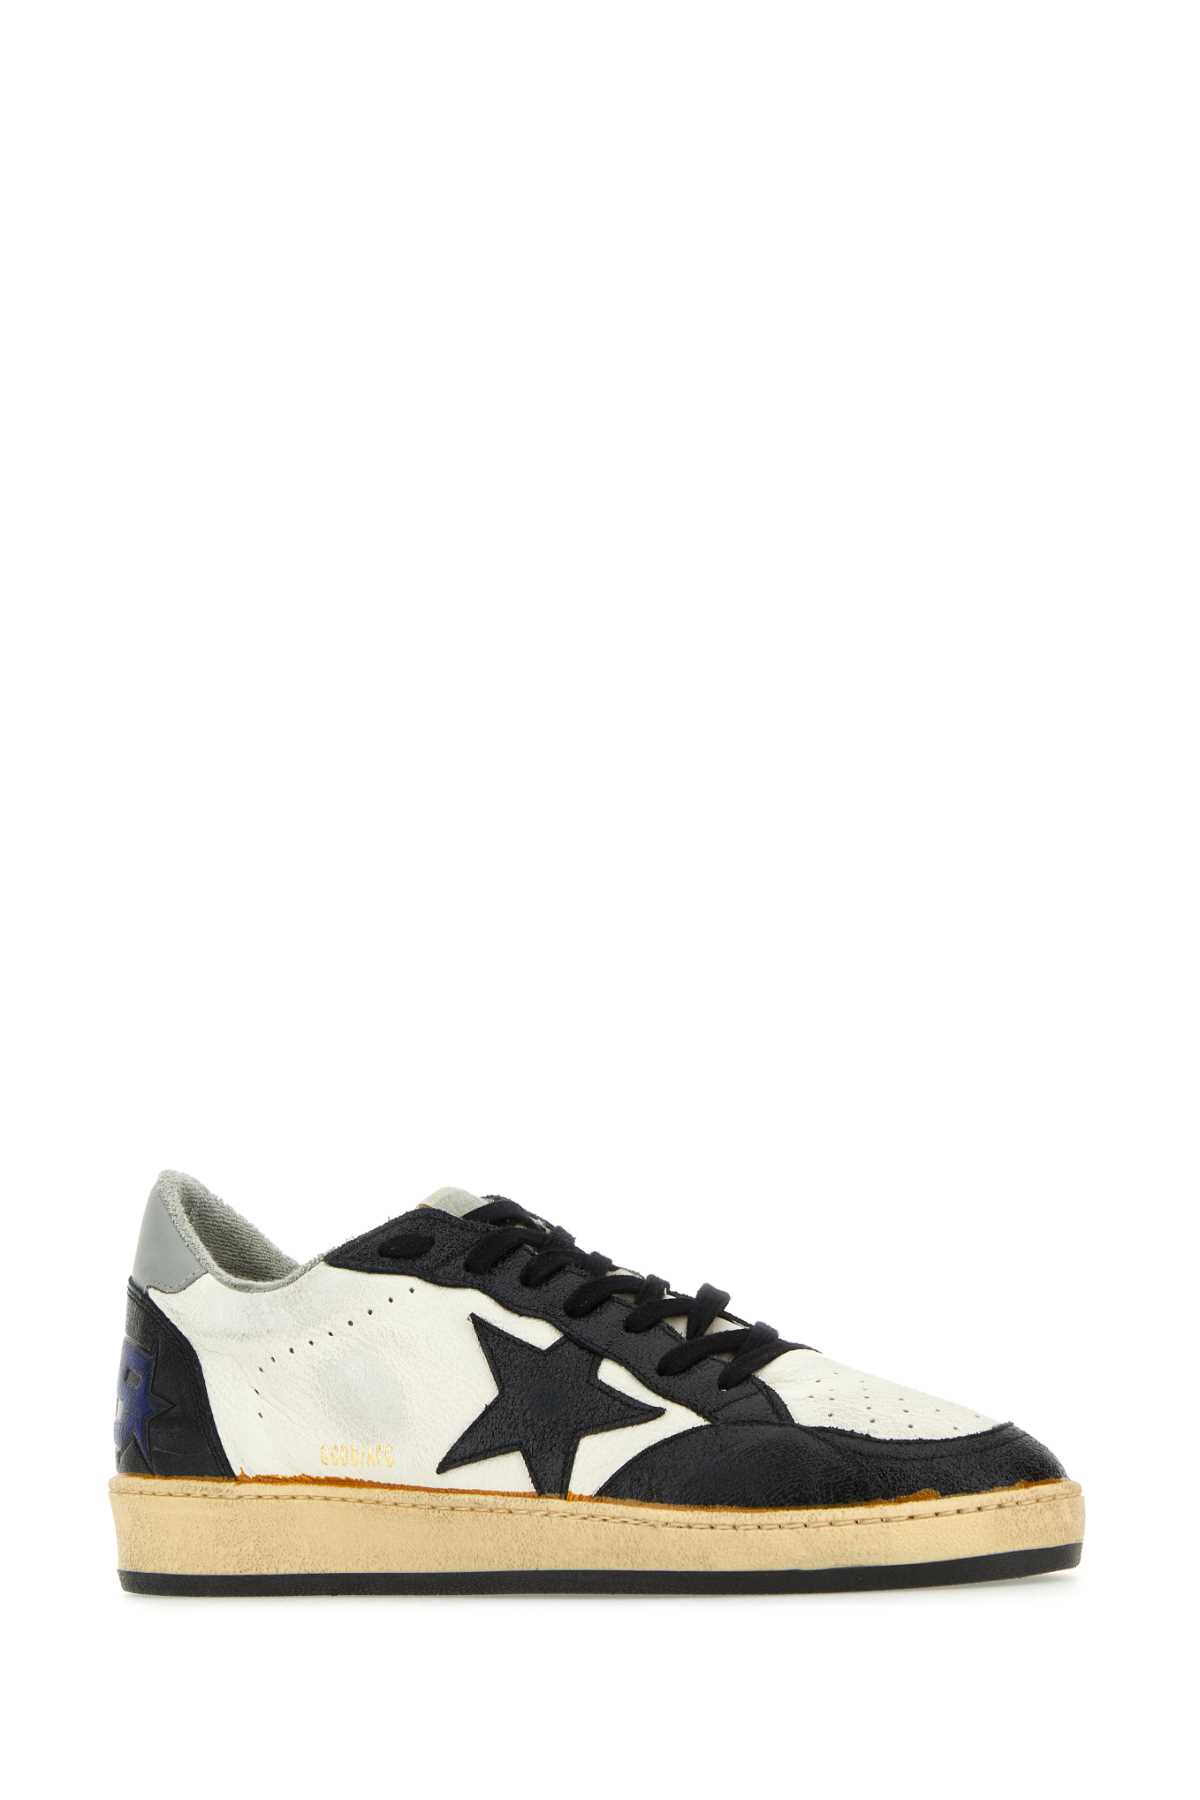 GOLDEN GOOSE MULTICOLOR LEATHER BALL STAR SNEAKERS